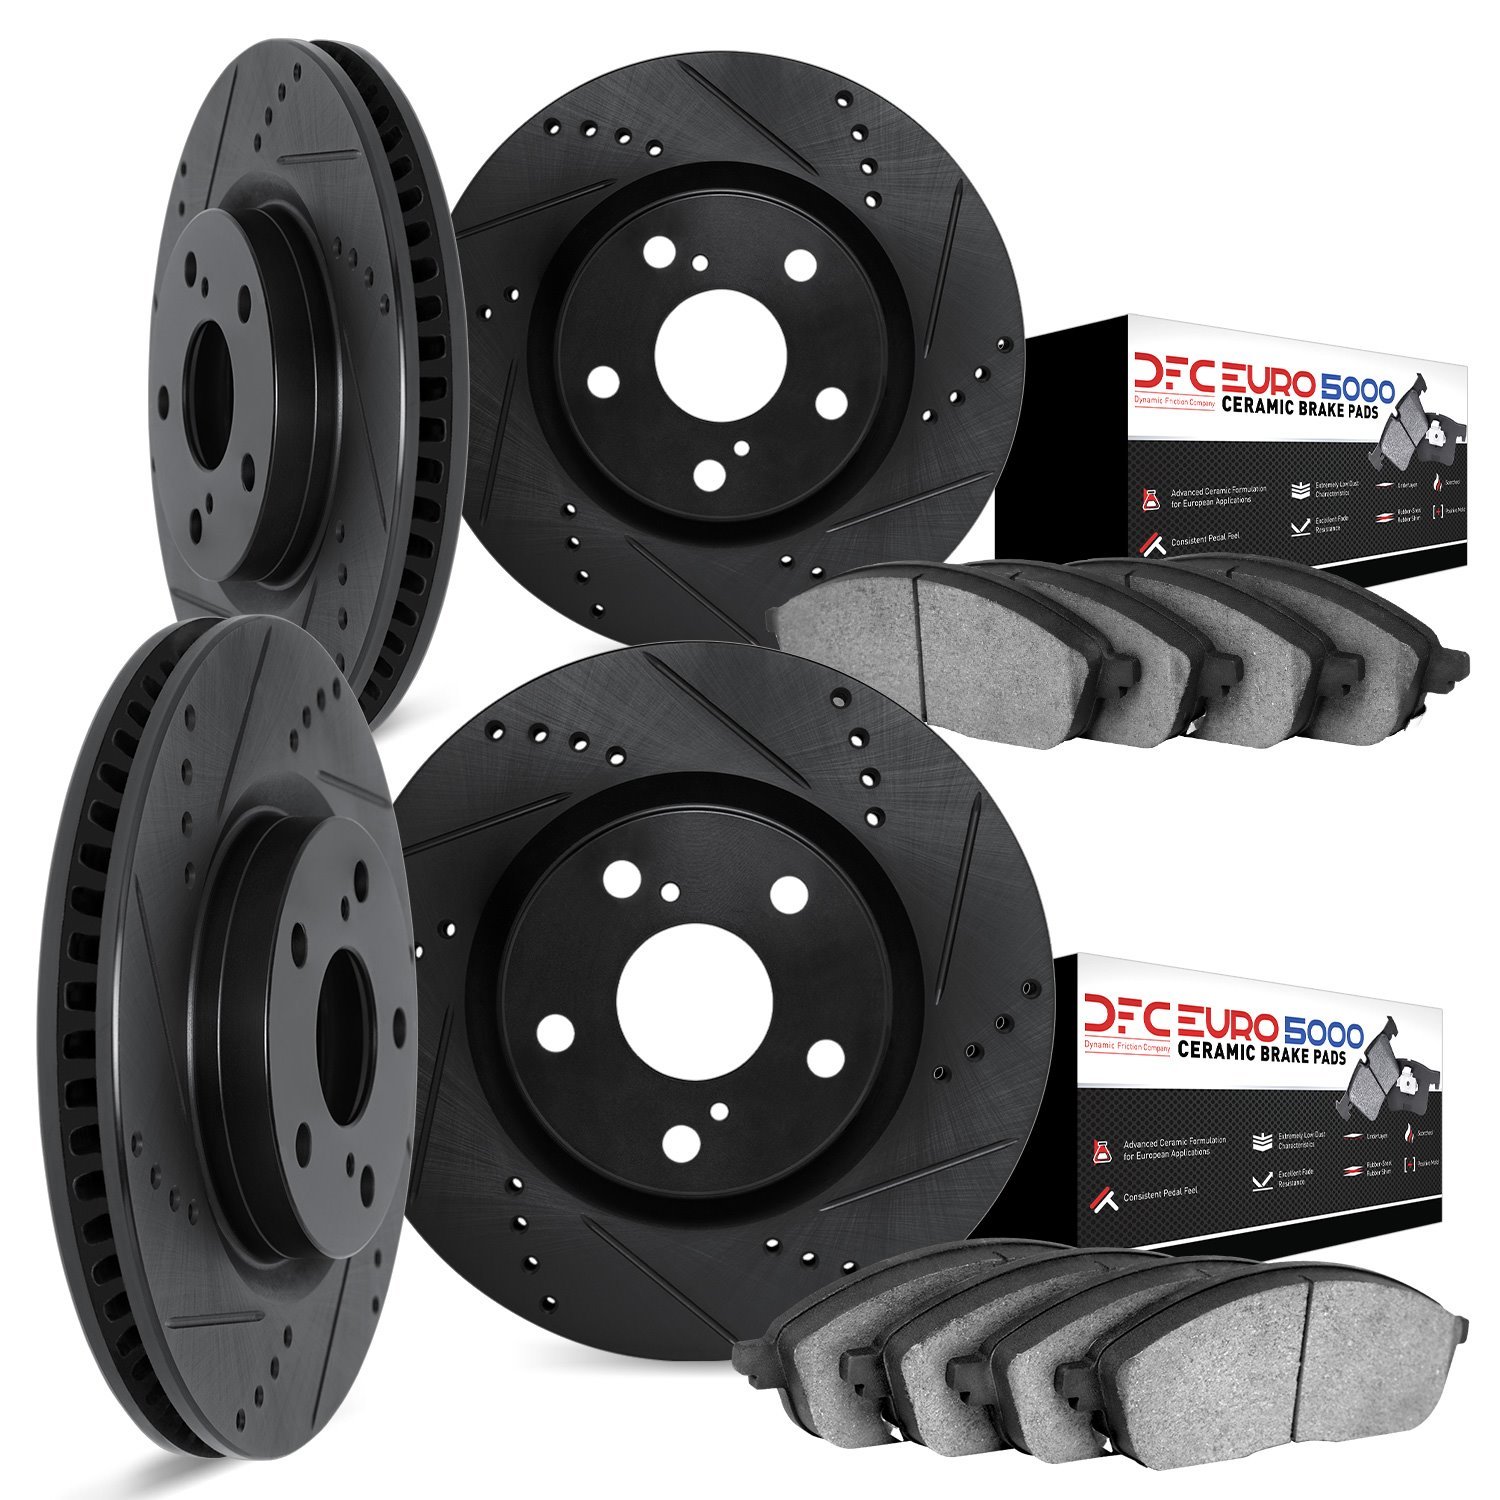 8604-02002 Drilled/Slotted Brake Rotors w/5000 Euro Ceramic Brake Pads Kit [Black], 1975-1983 Porsche, Position: Front and Rear